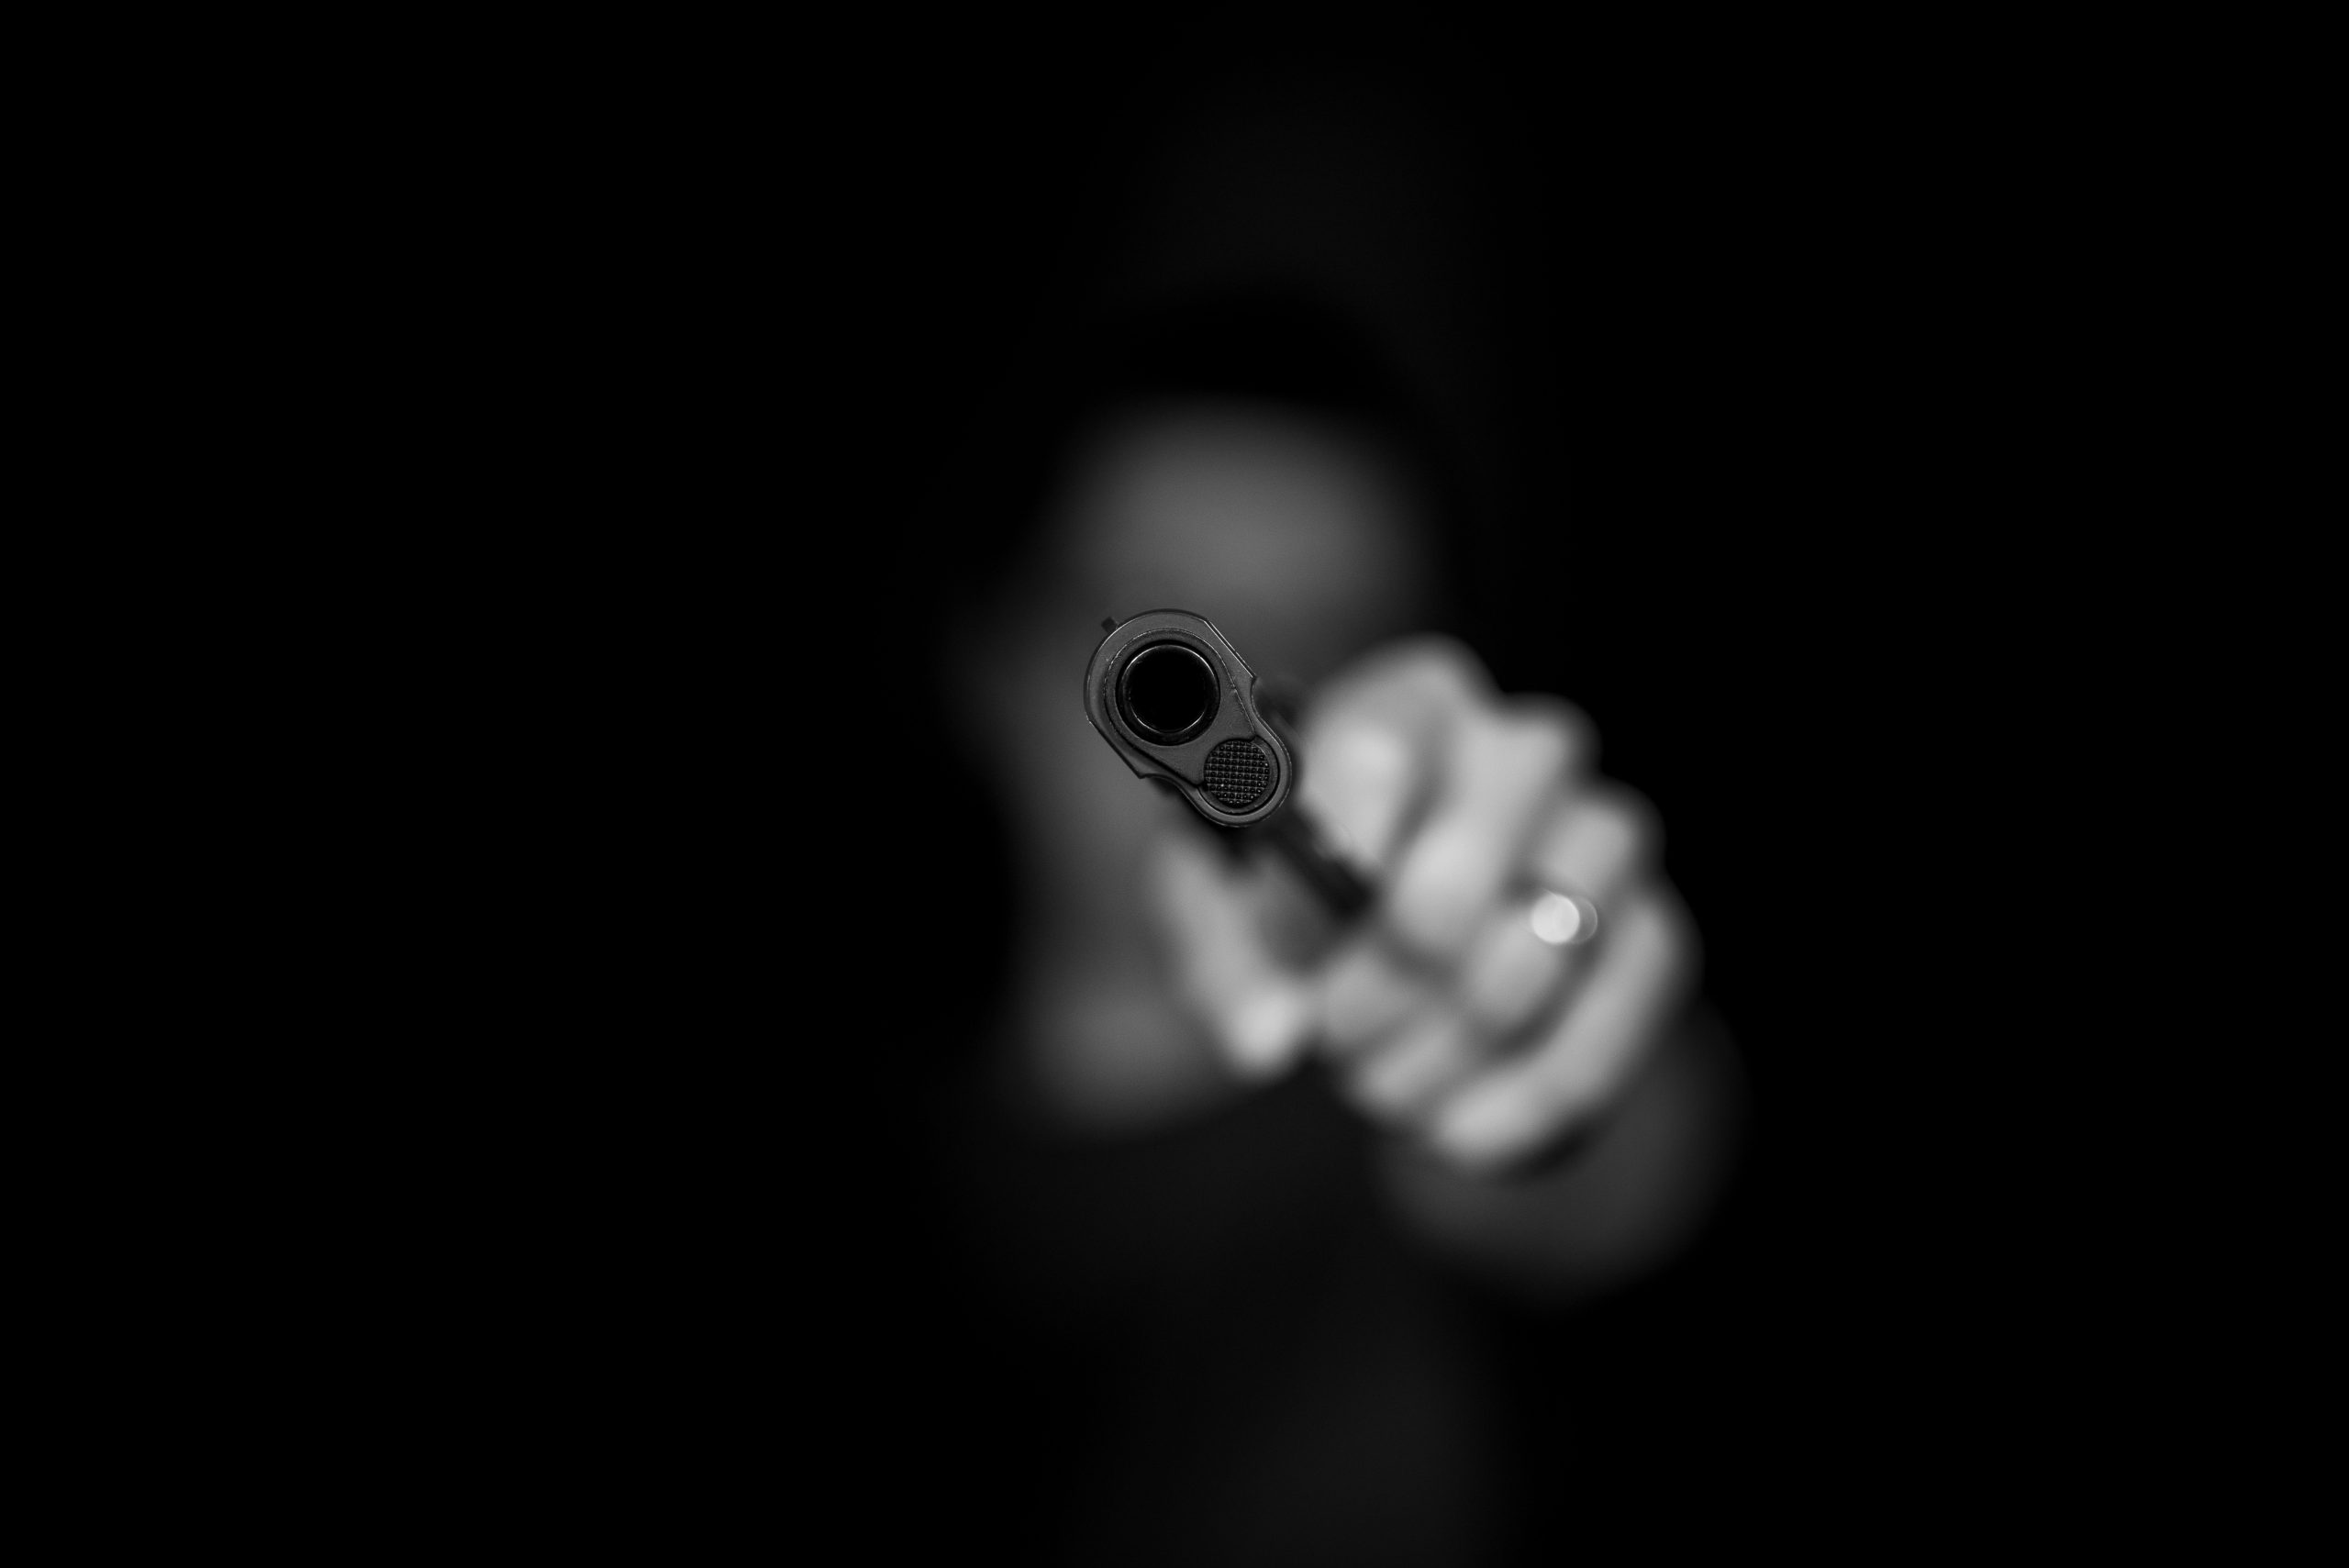 A black-and-white image of a person holding a gun